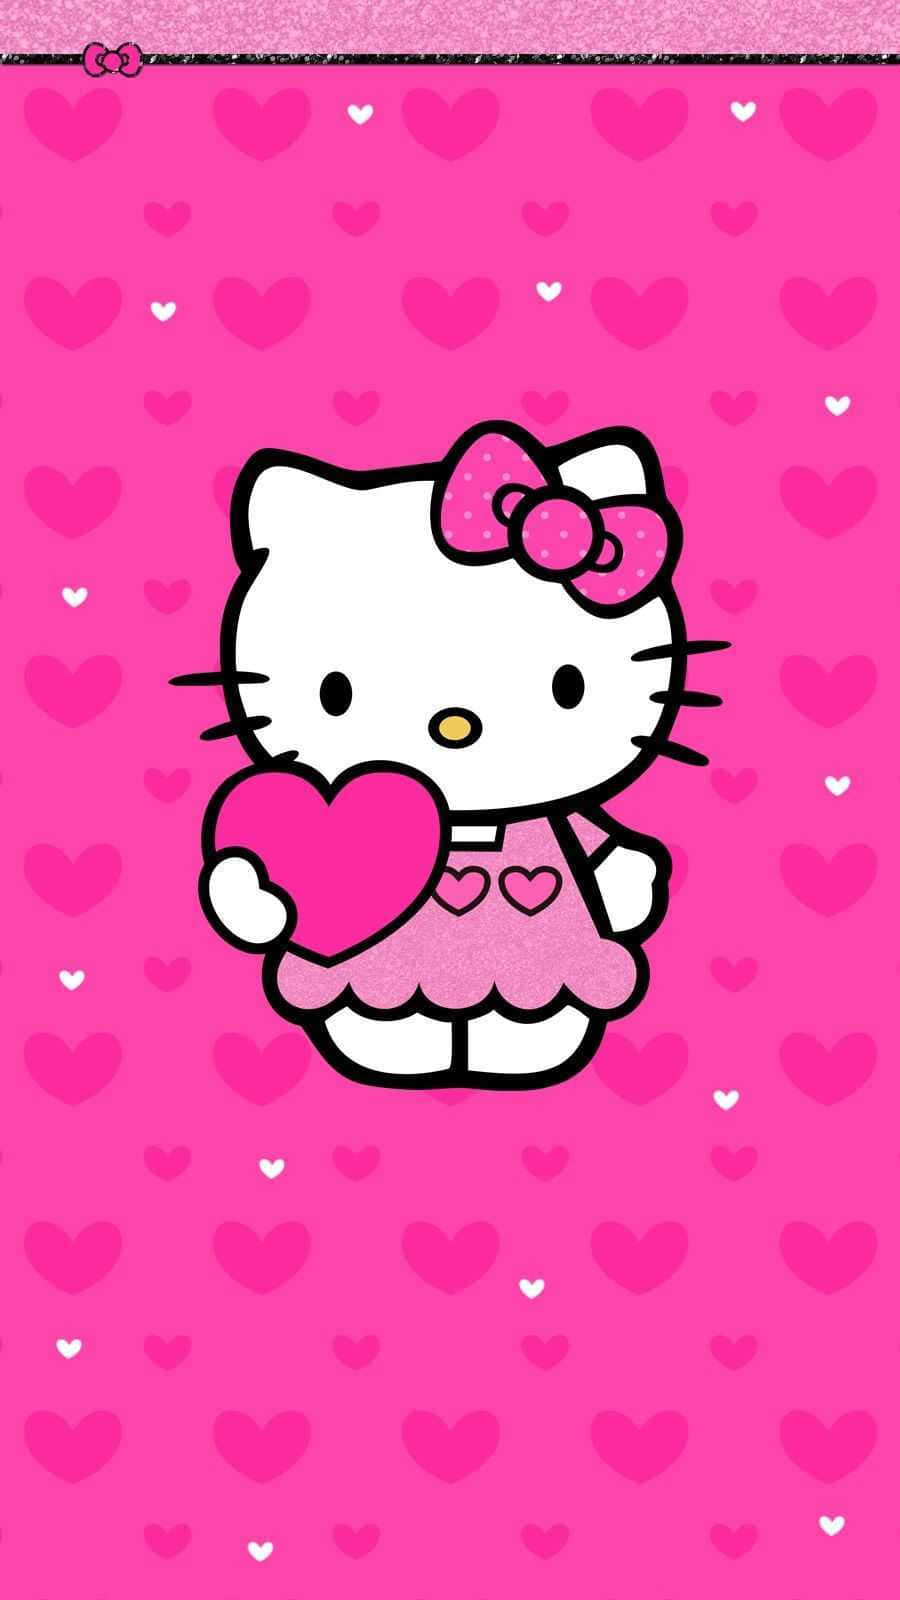 Get Ready to Play and Have Fun with Hello Kitty PC Wallpaper